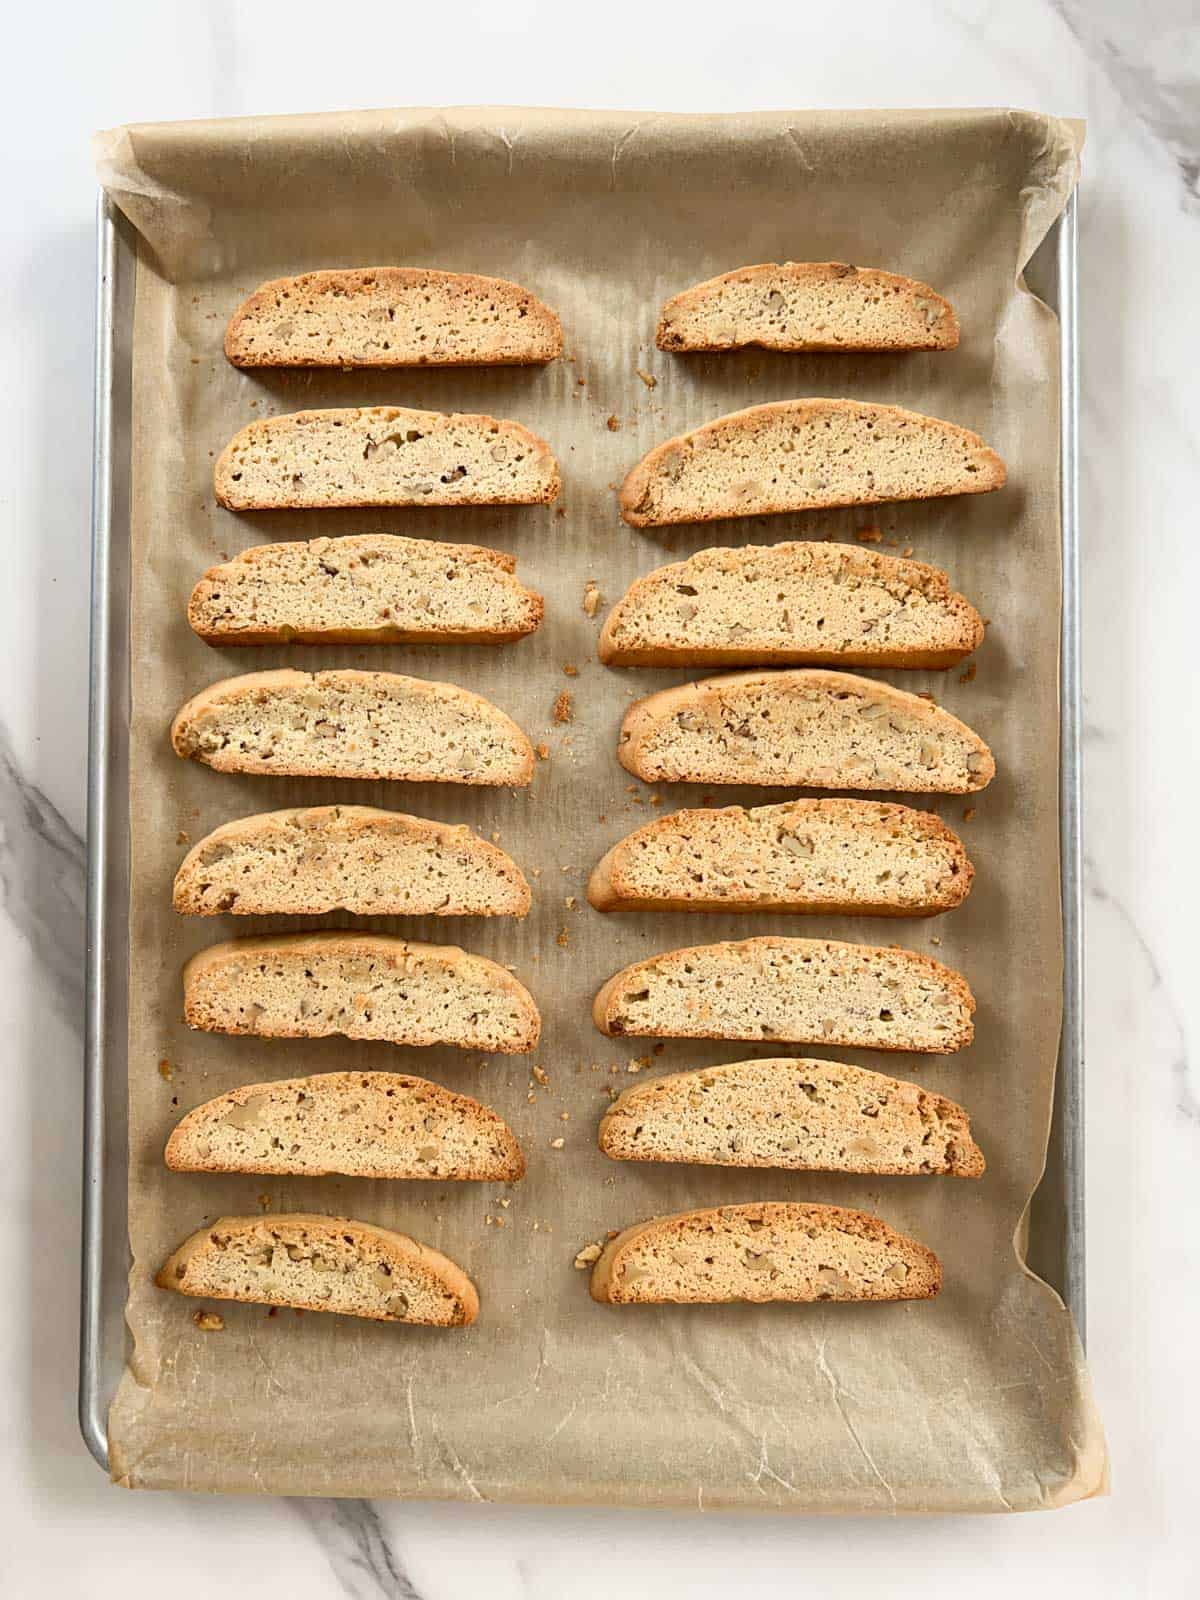 Sixteen slices of baked biscotti on a baking sheet lined with parchment paper.